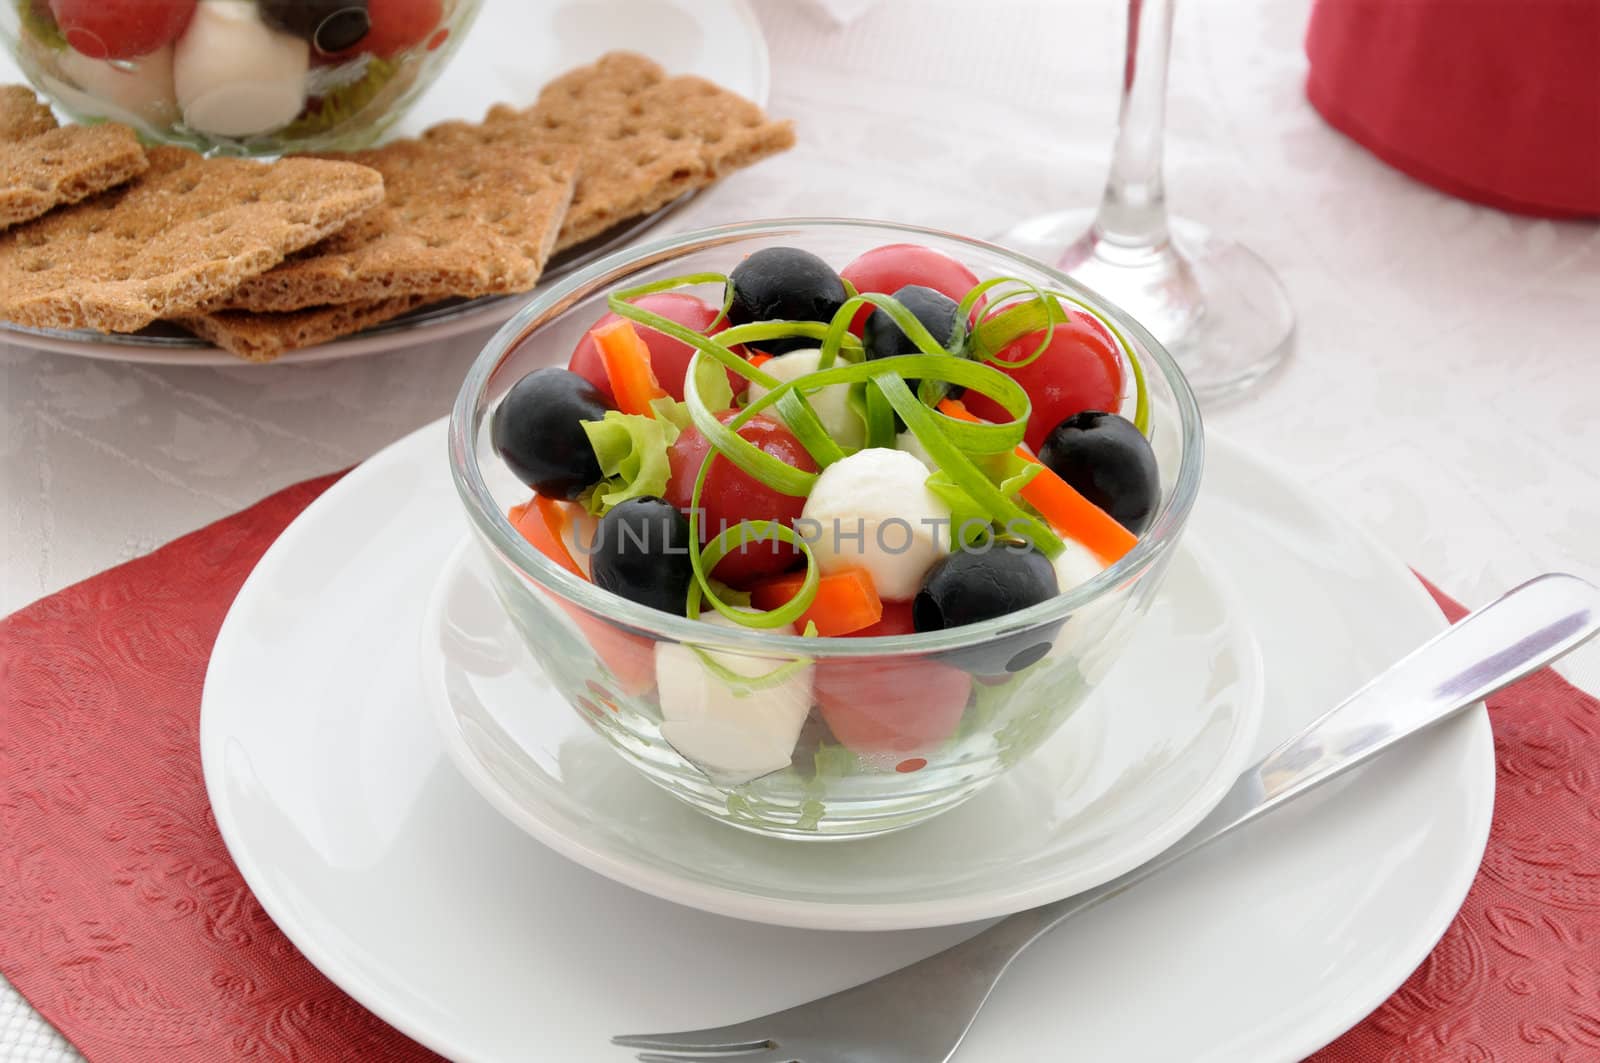 Salad of lettuce, cherry tomatoes, olives and mozzarella with pe by Apolonia